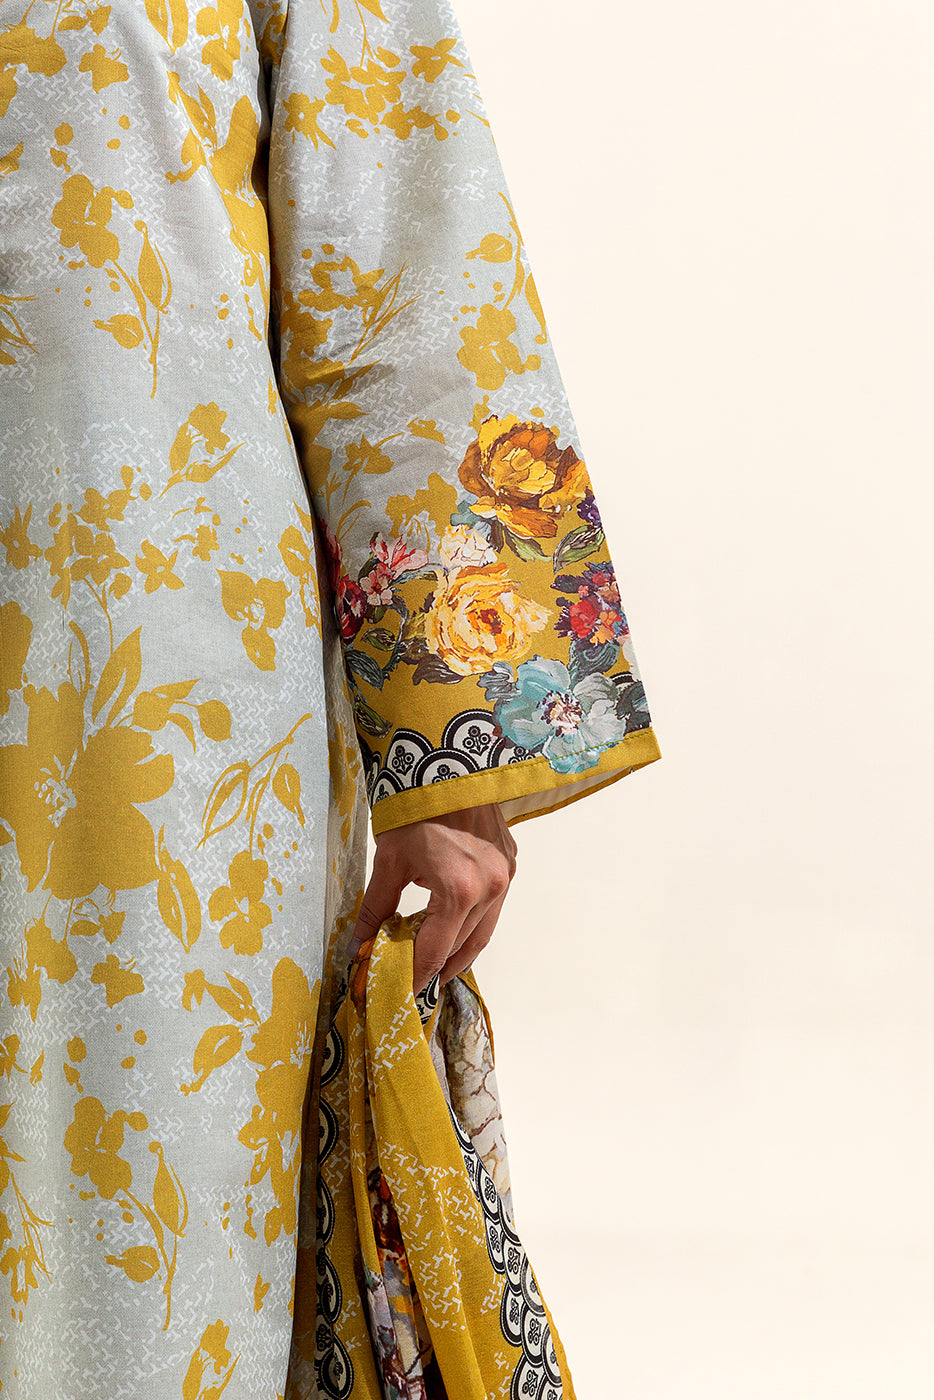 3 PIECE PRINTED LAWN SUIT-CANARY BLOOM (UNSTITCHED)